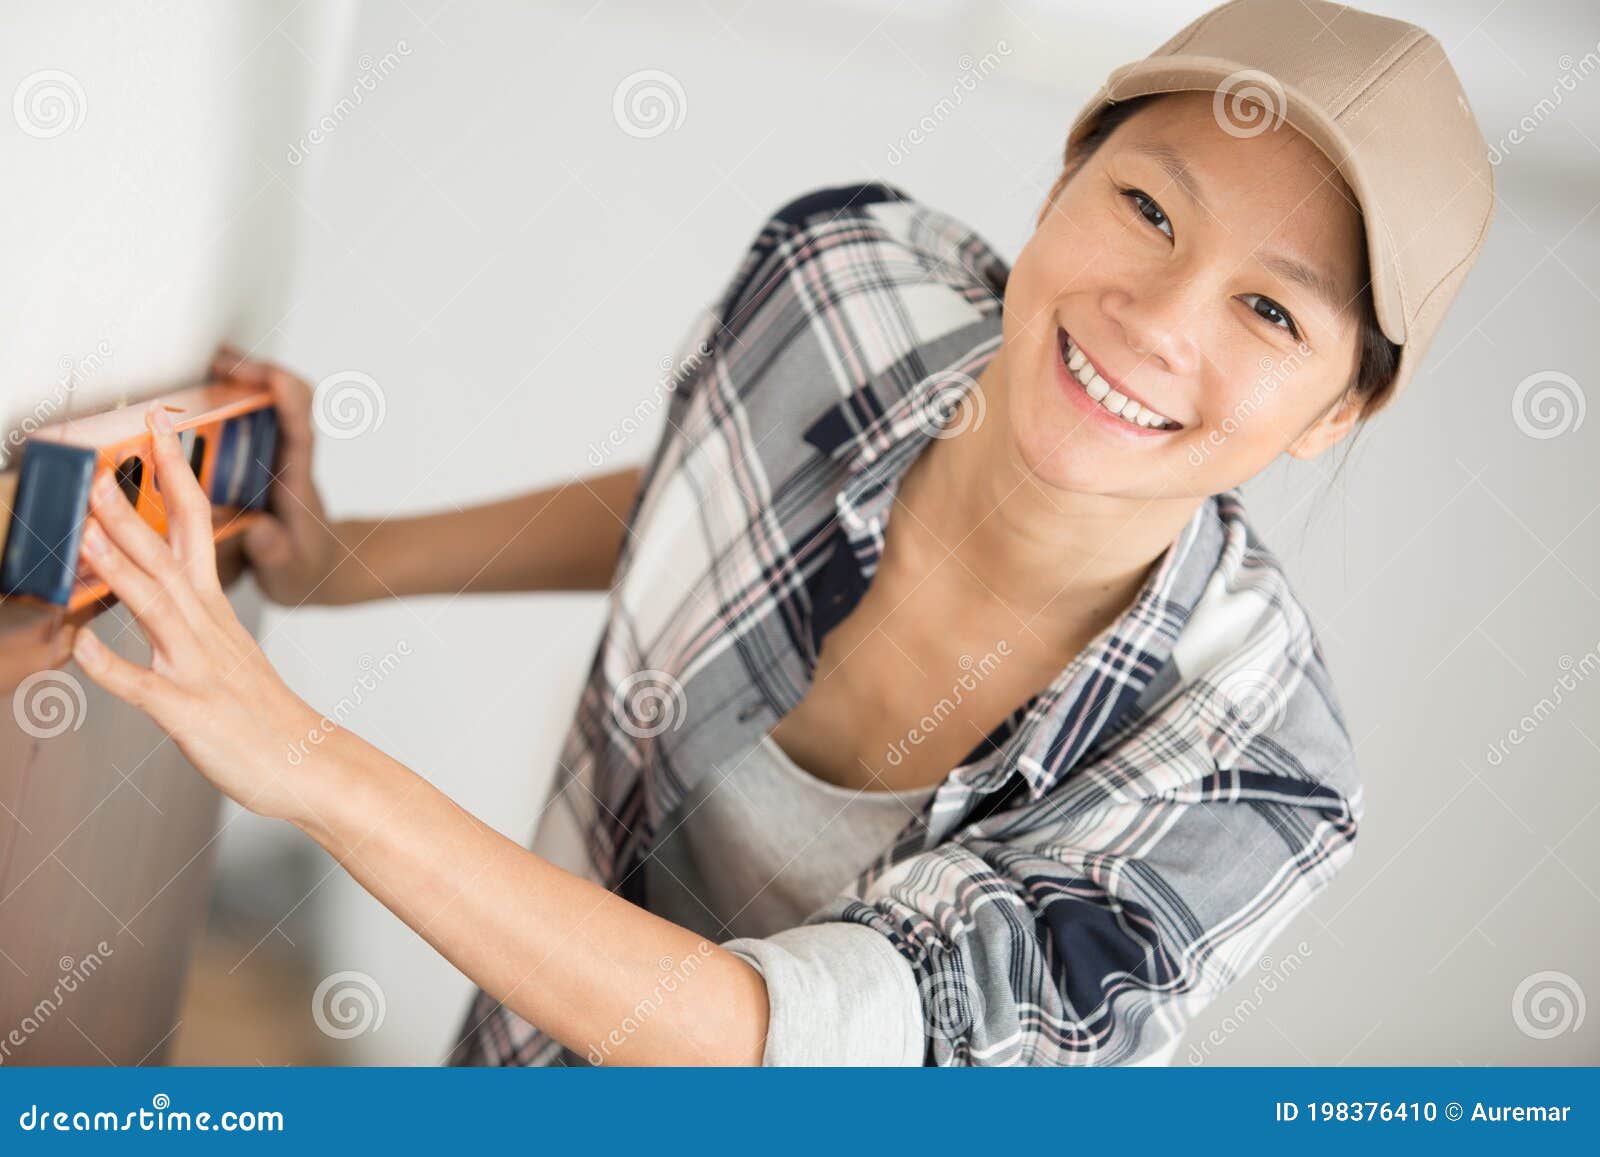 woman smiling at camera while holding sprit level